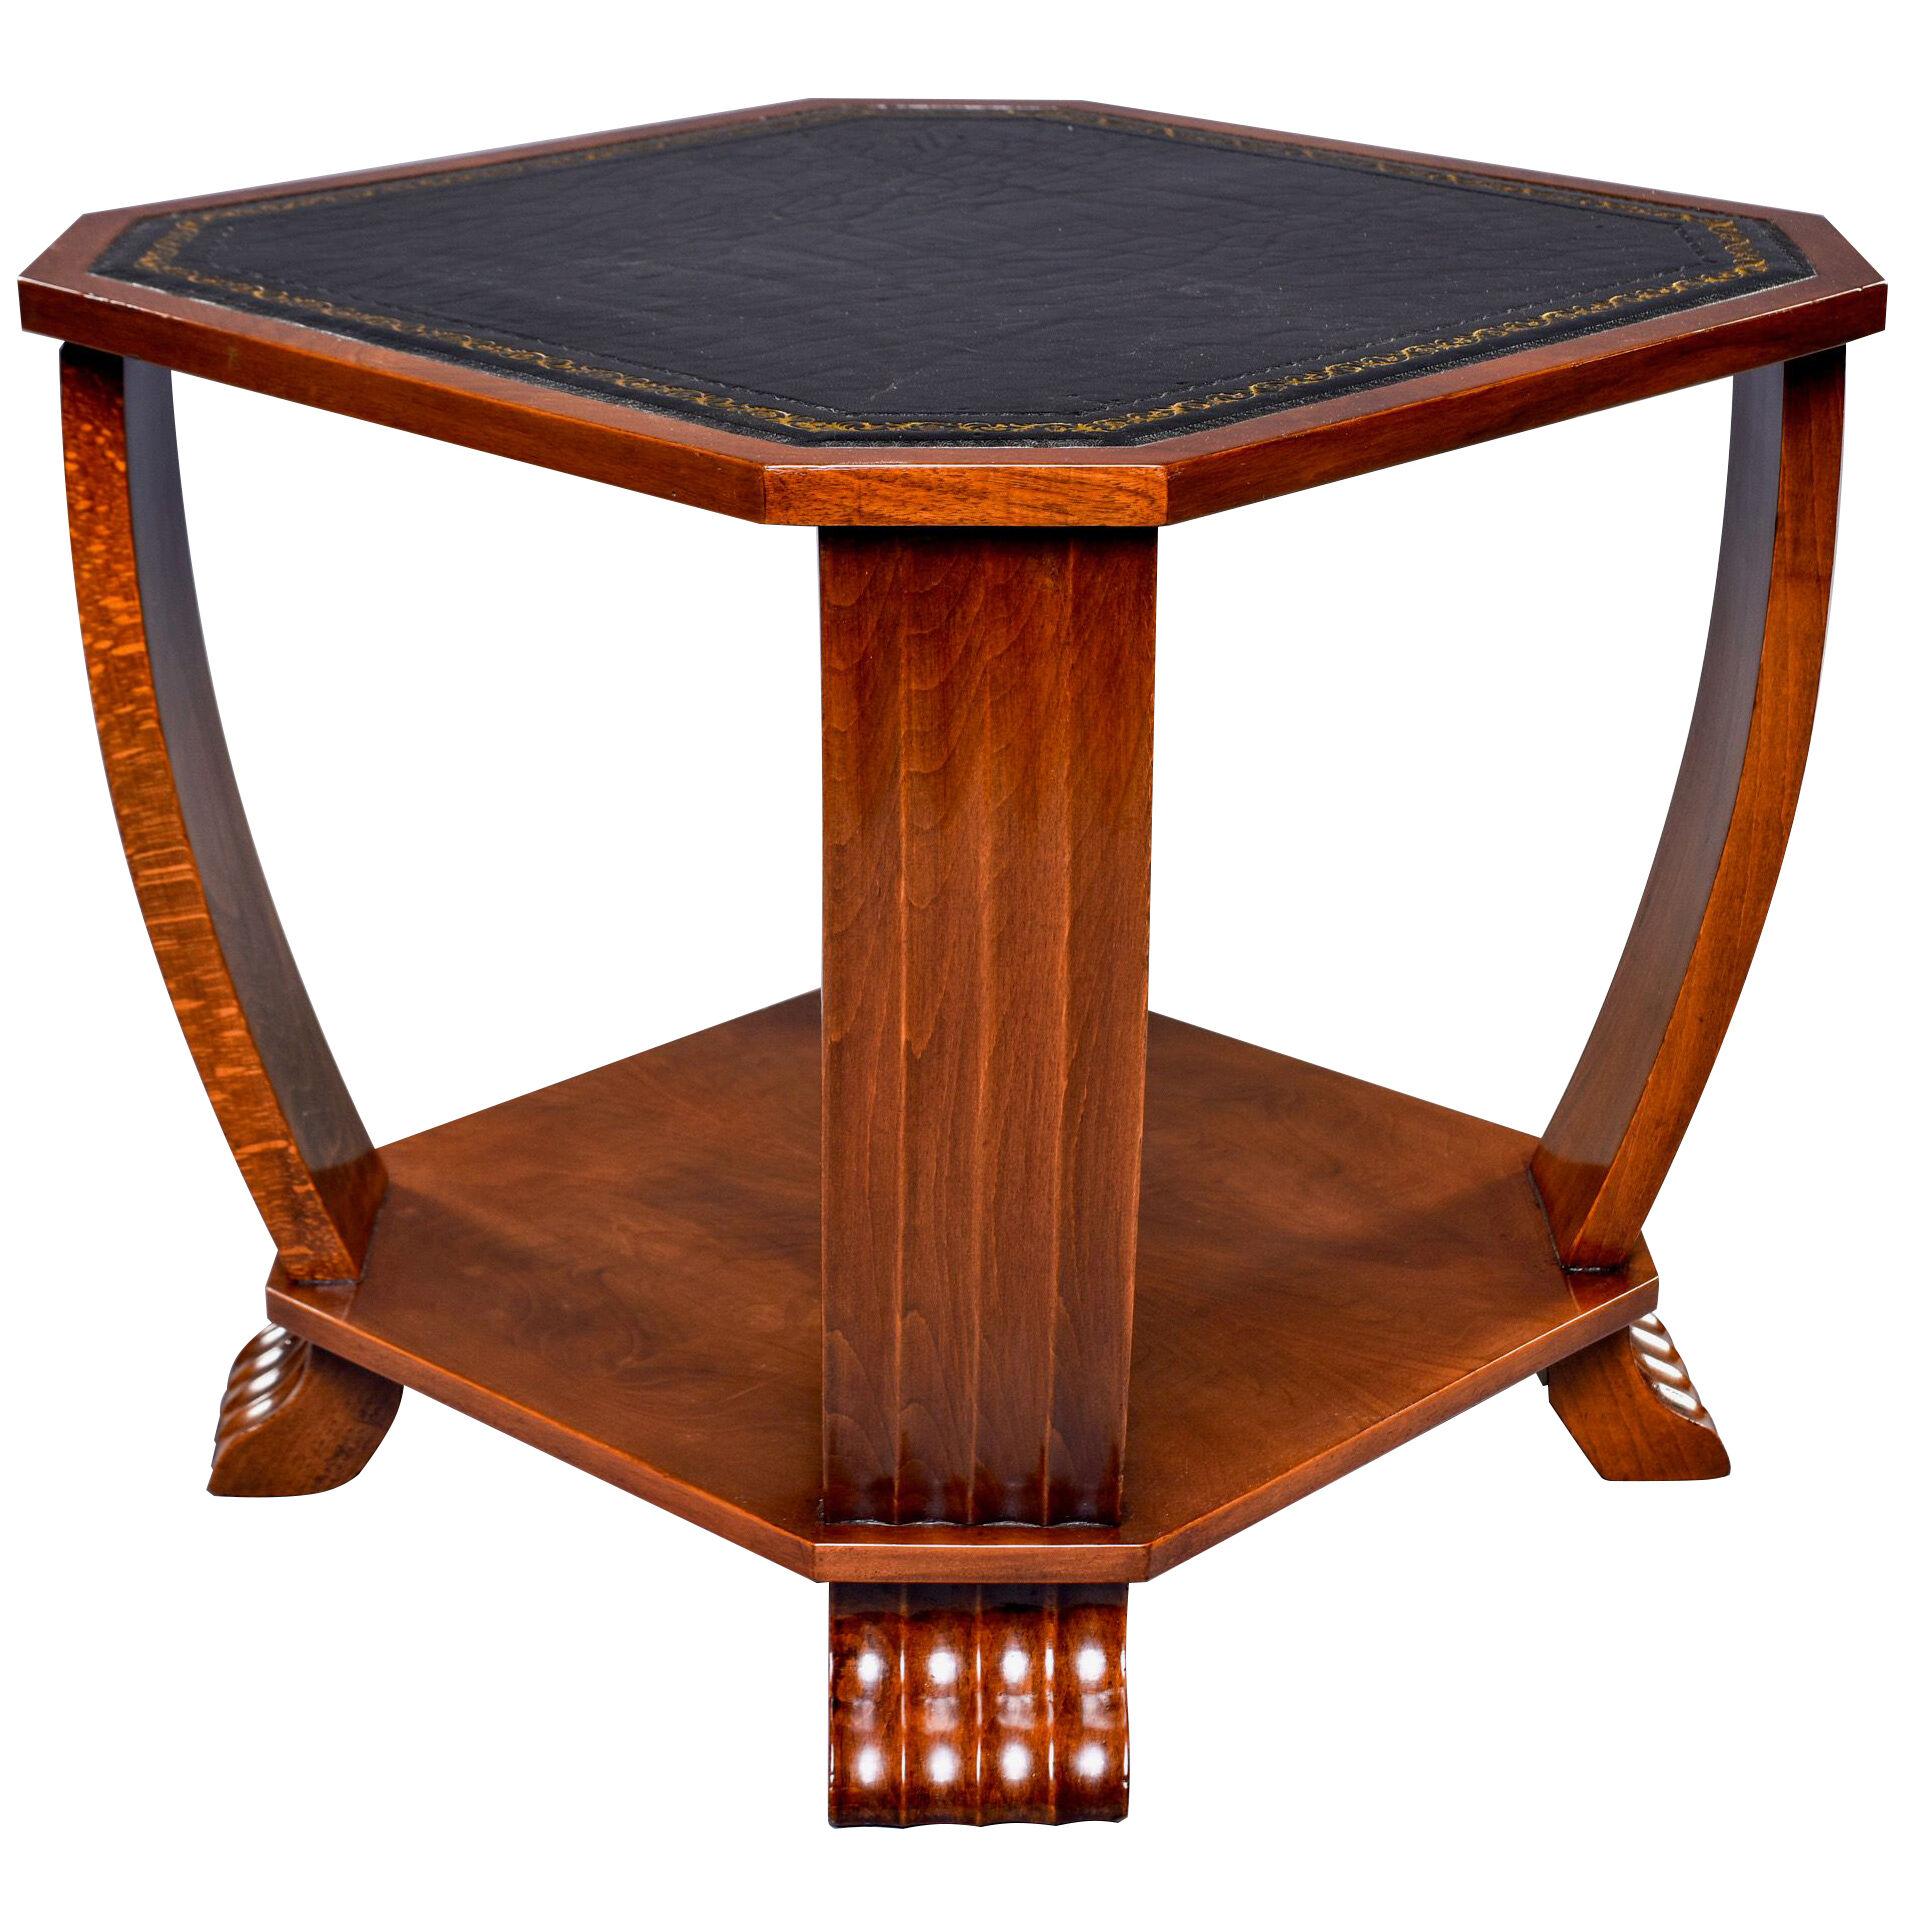 French Art Deco Octagonal Shape Side Table With Black Leather Top